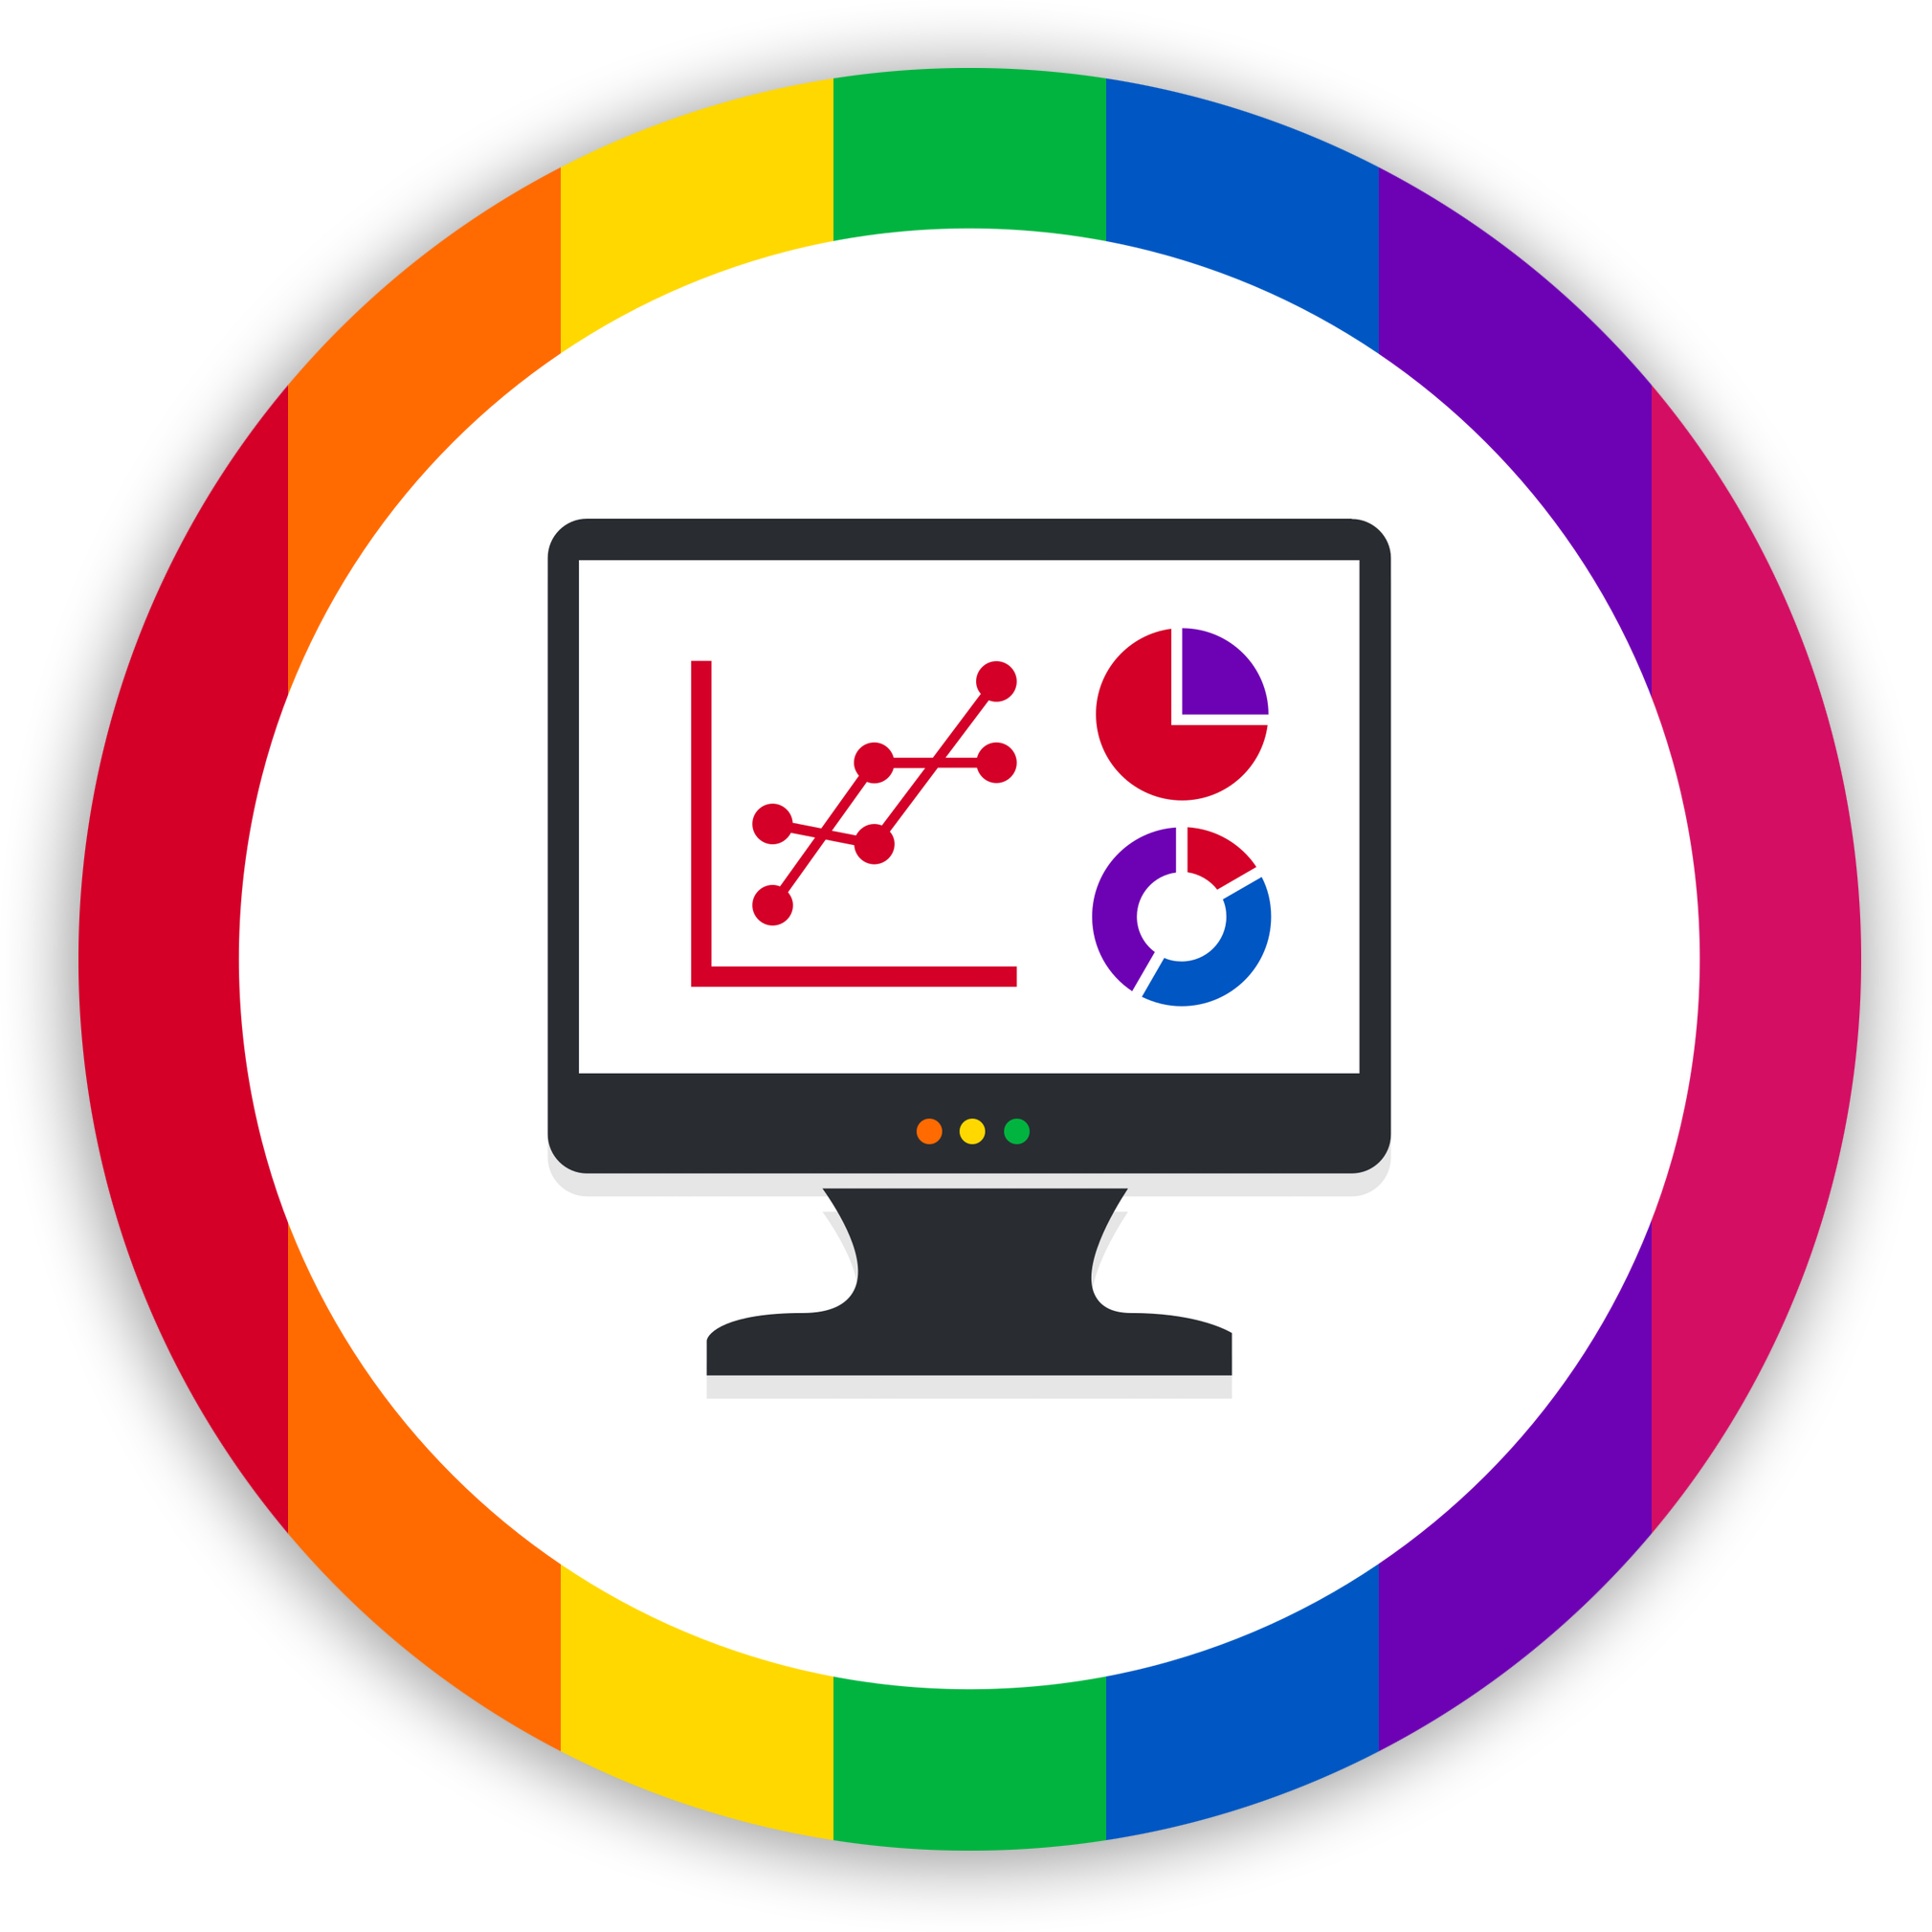 Perfectly Pitched's social media avatar, showing a brightly colored rainbow background, with an icon of a presentation on a computer screen.